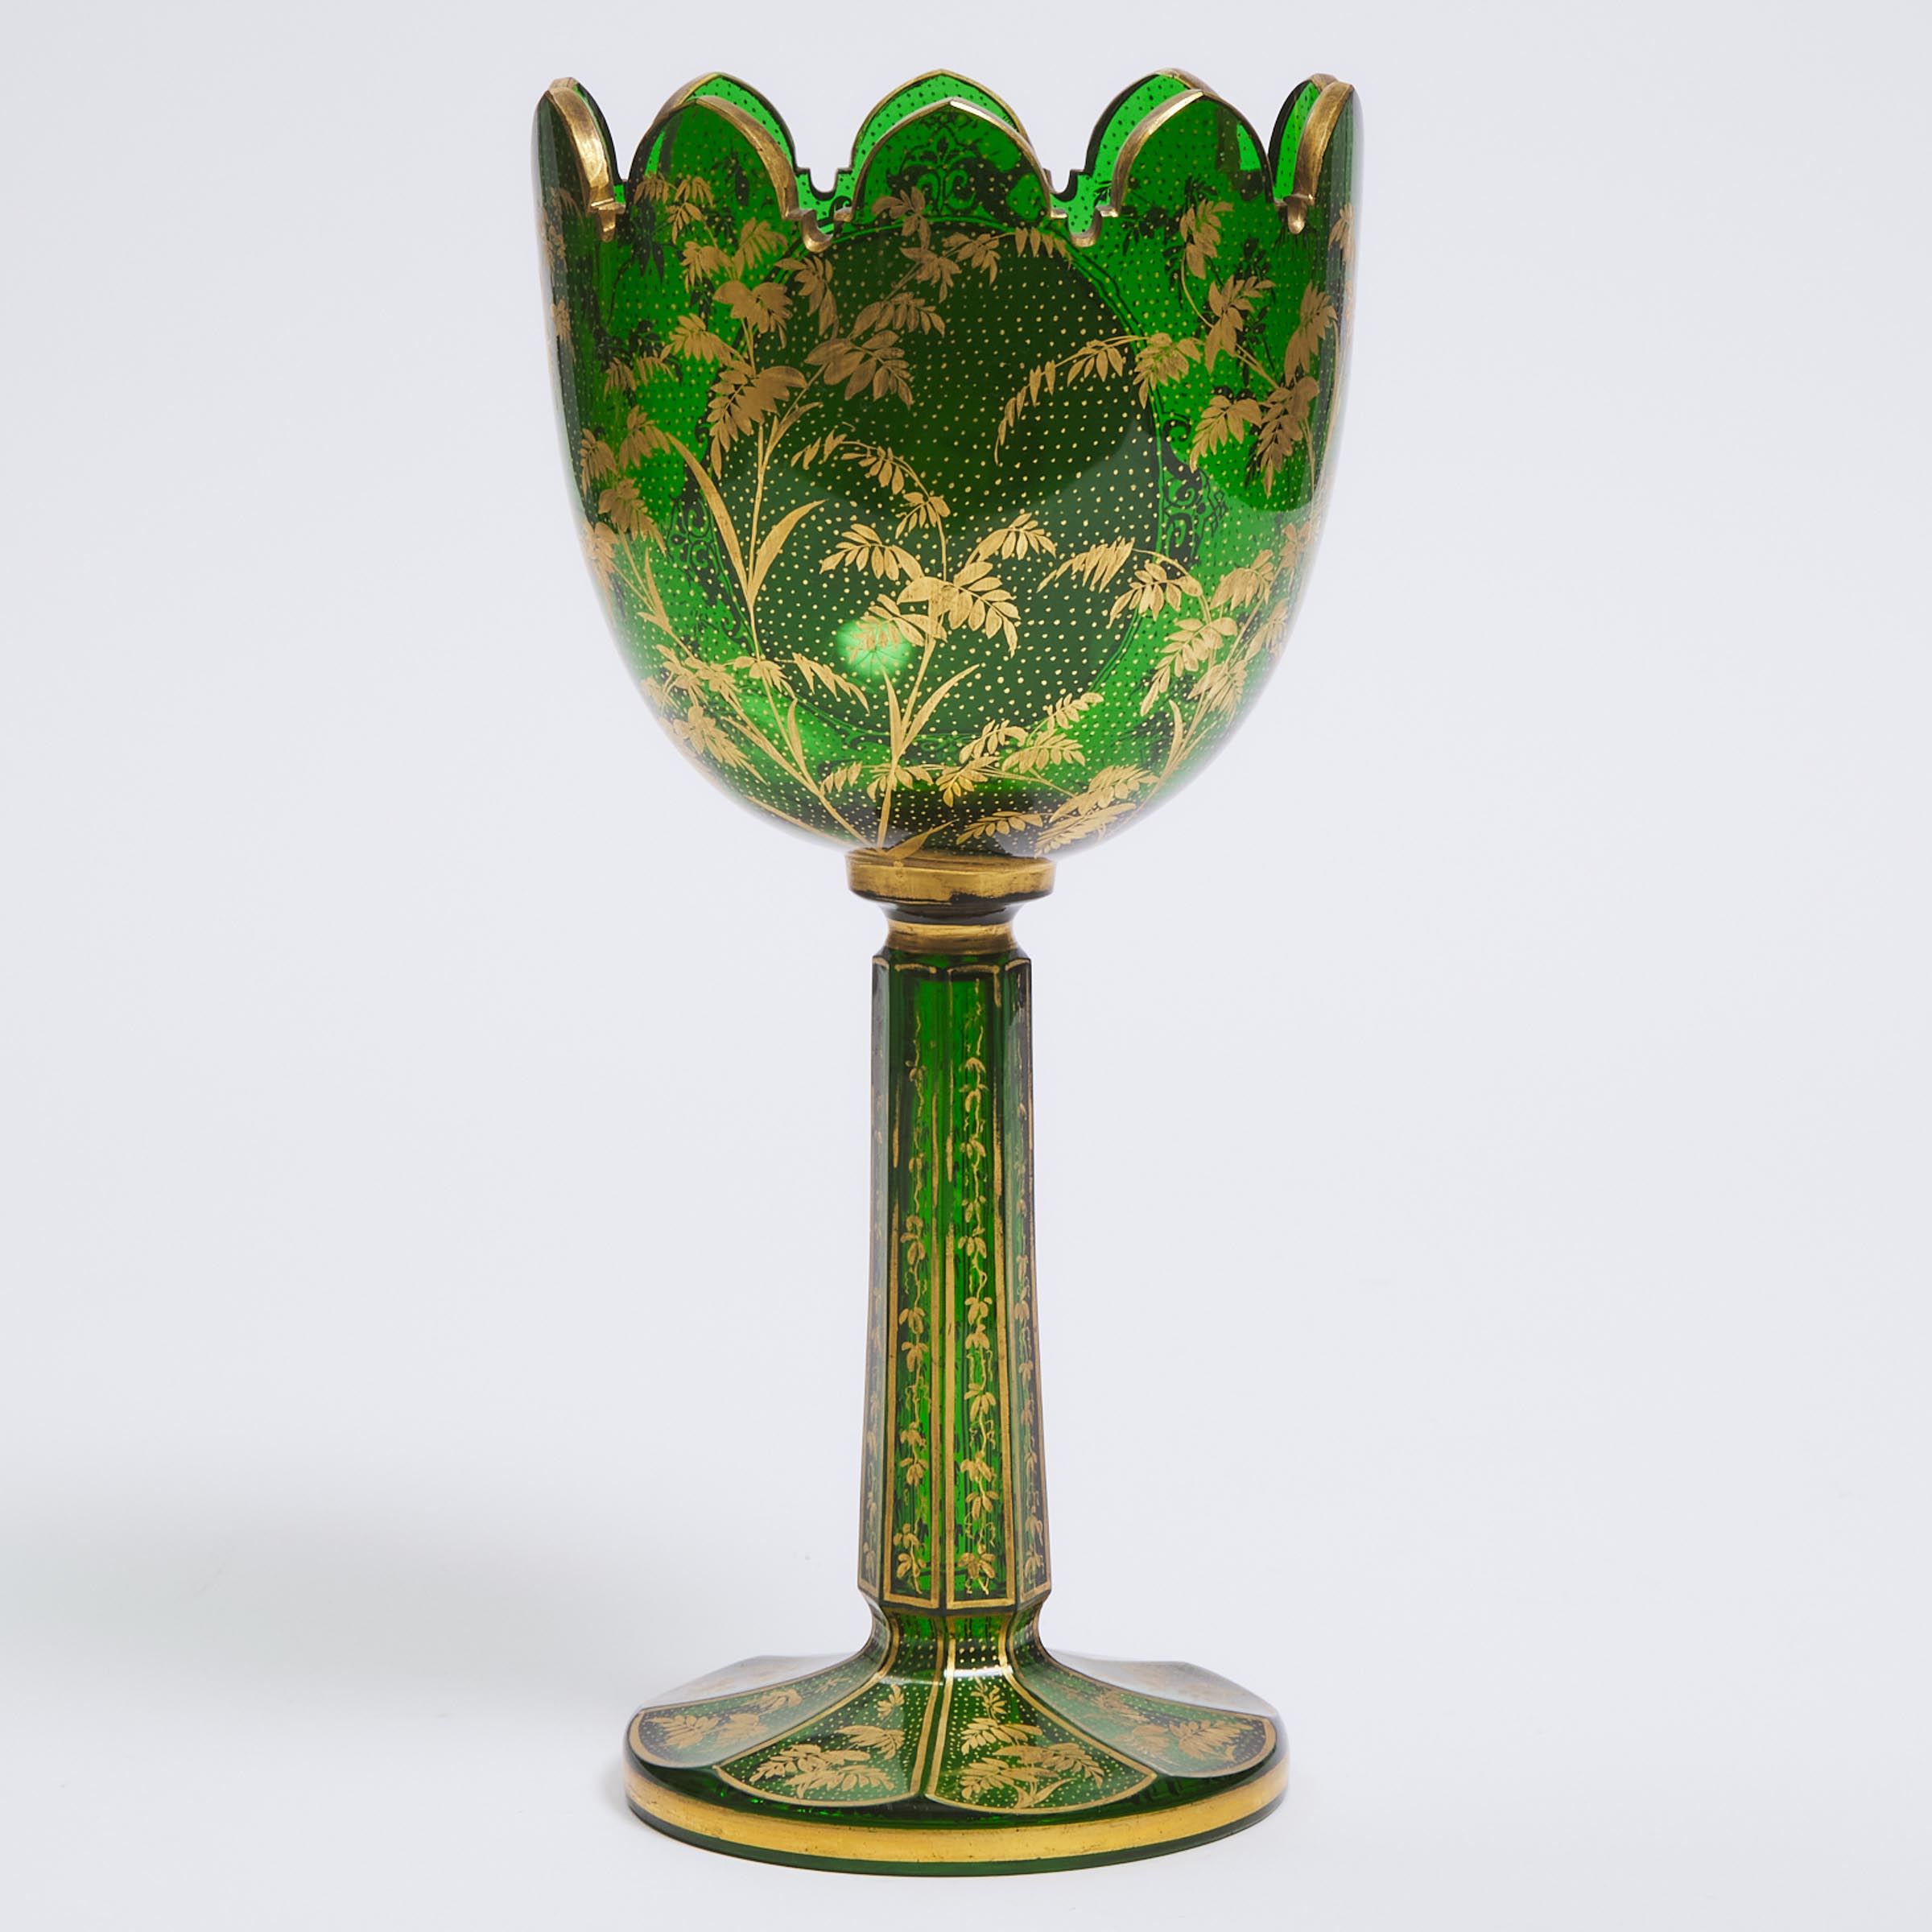 Bohemian Green and Gilt Glass Enameled Portrait Vase, late 19th century